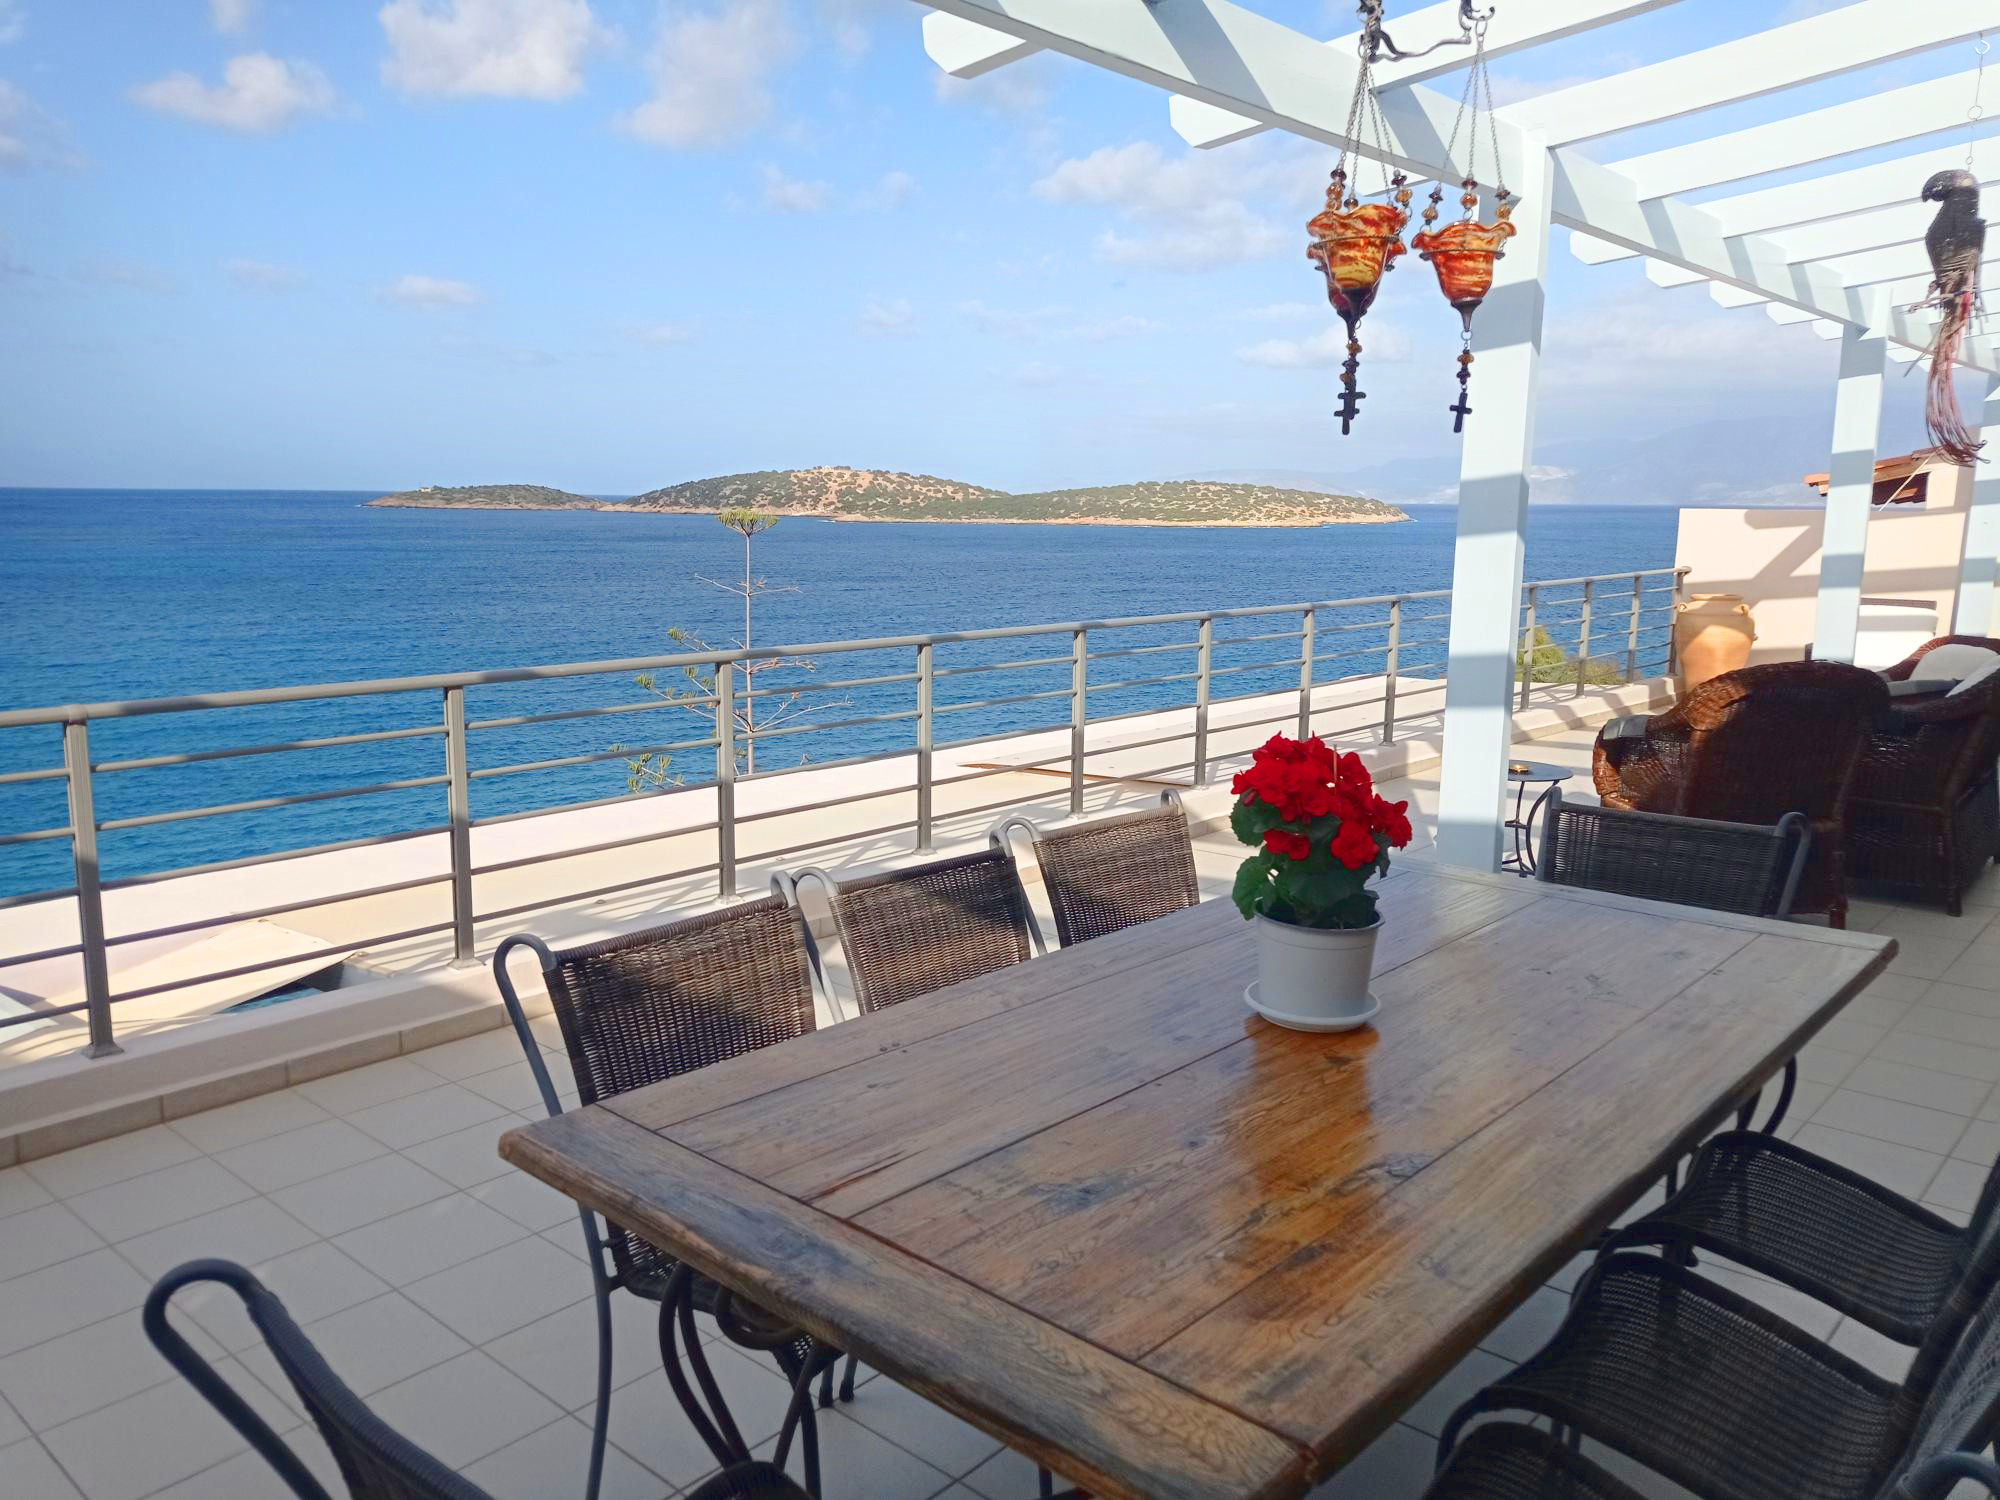 Seafront penthouse 3 bed town apartment with spectacular sea views. Fully Furnished.